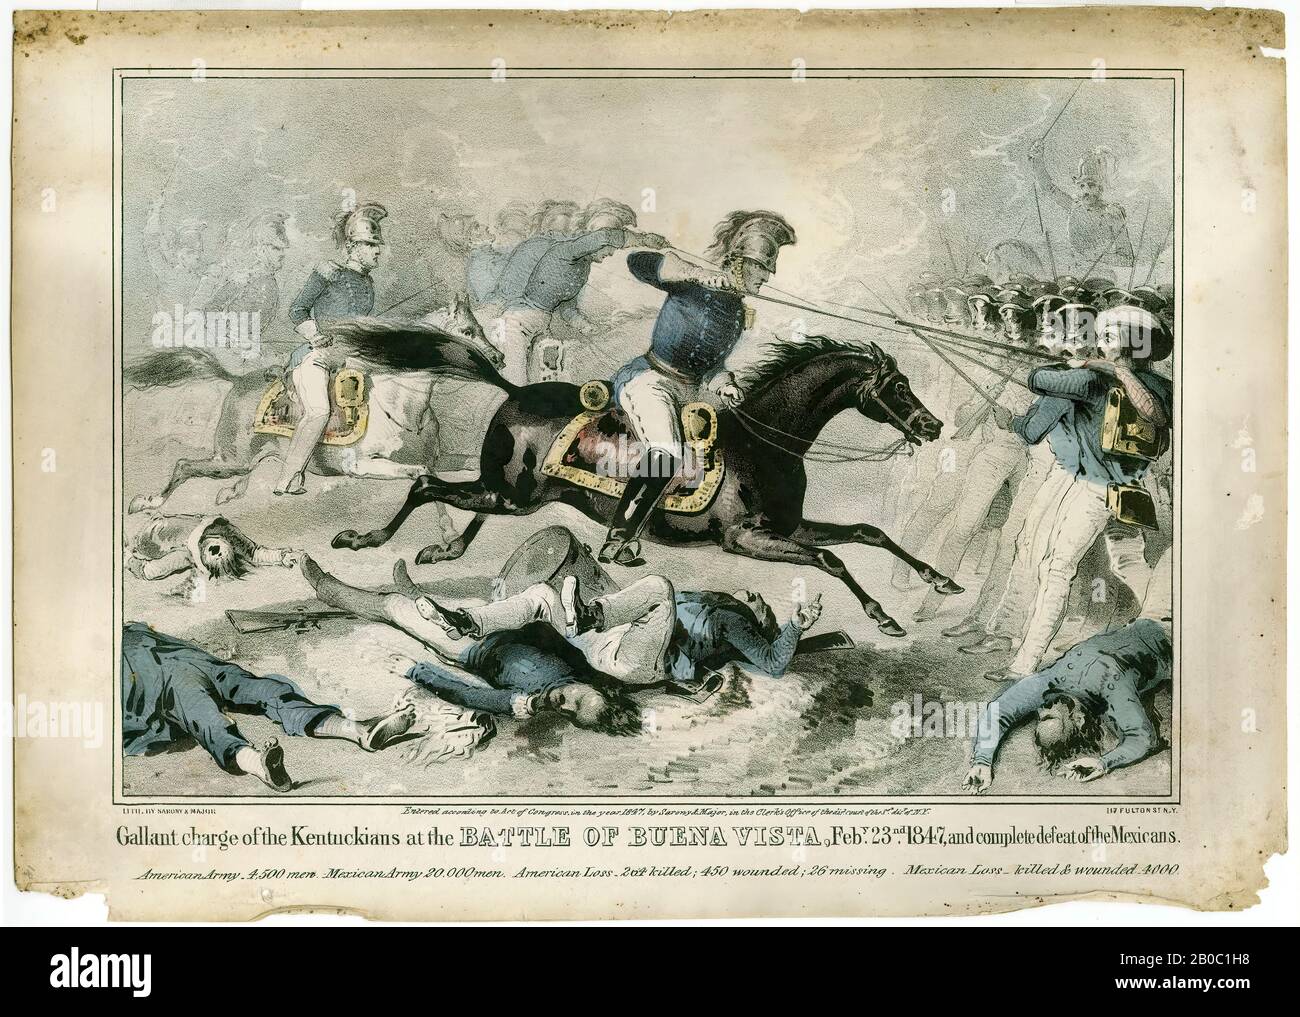 Unknown Artist, Part of a Collection of Mexican-American War Prints, Gallant Charge of the Kentuckians at the Battle of Buena Vista, February 23nd, 1847, and Complete Defeat of the Mexicans, 1847, color lithograph on paper, 9 15/16 in. x 13 15/16 in. (25.24 cm x 35.4 cm Stock Photo